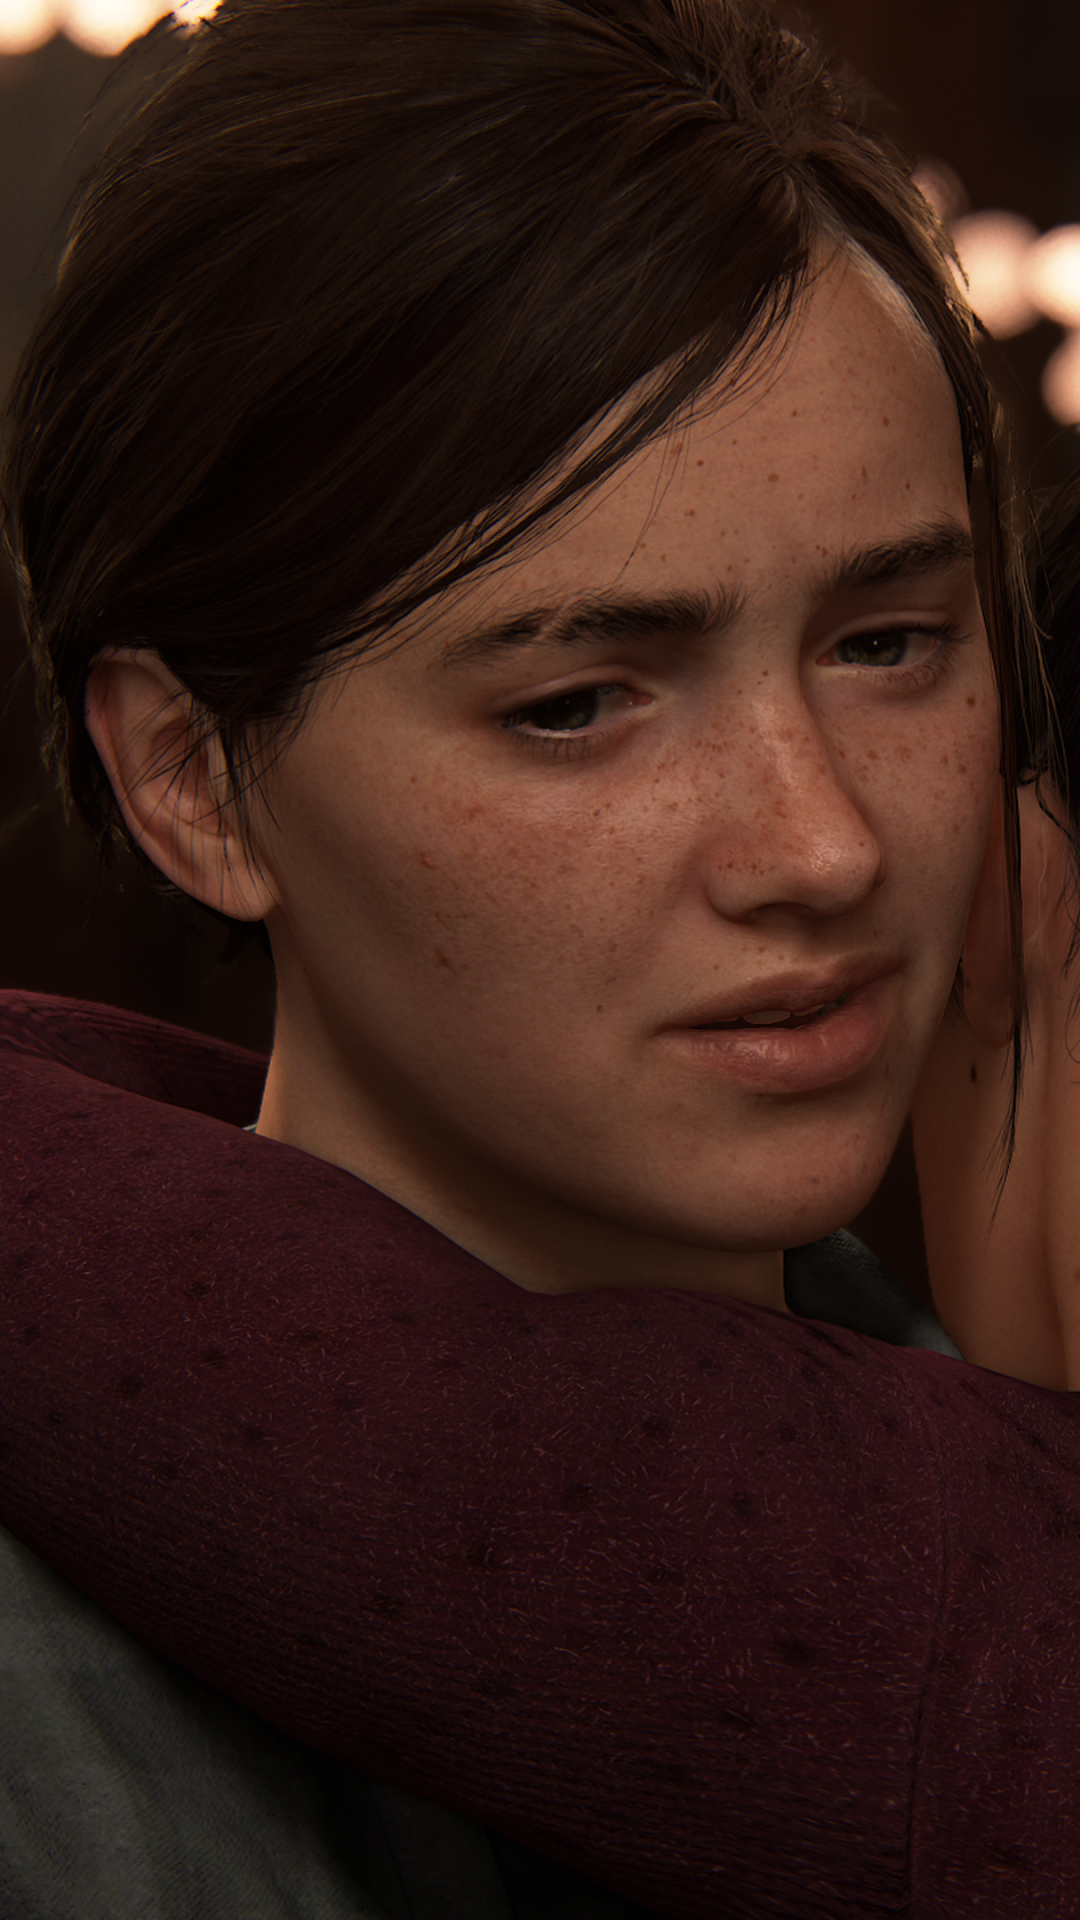 Mobile wallpaper: Video Game, Ellie (The Last Of Us), The Last Of